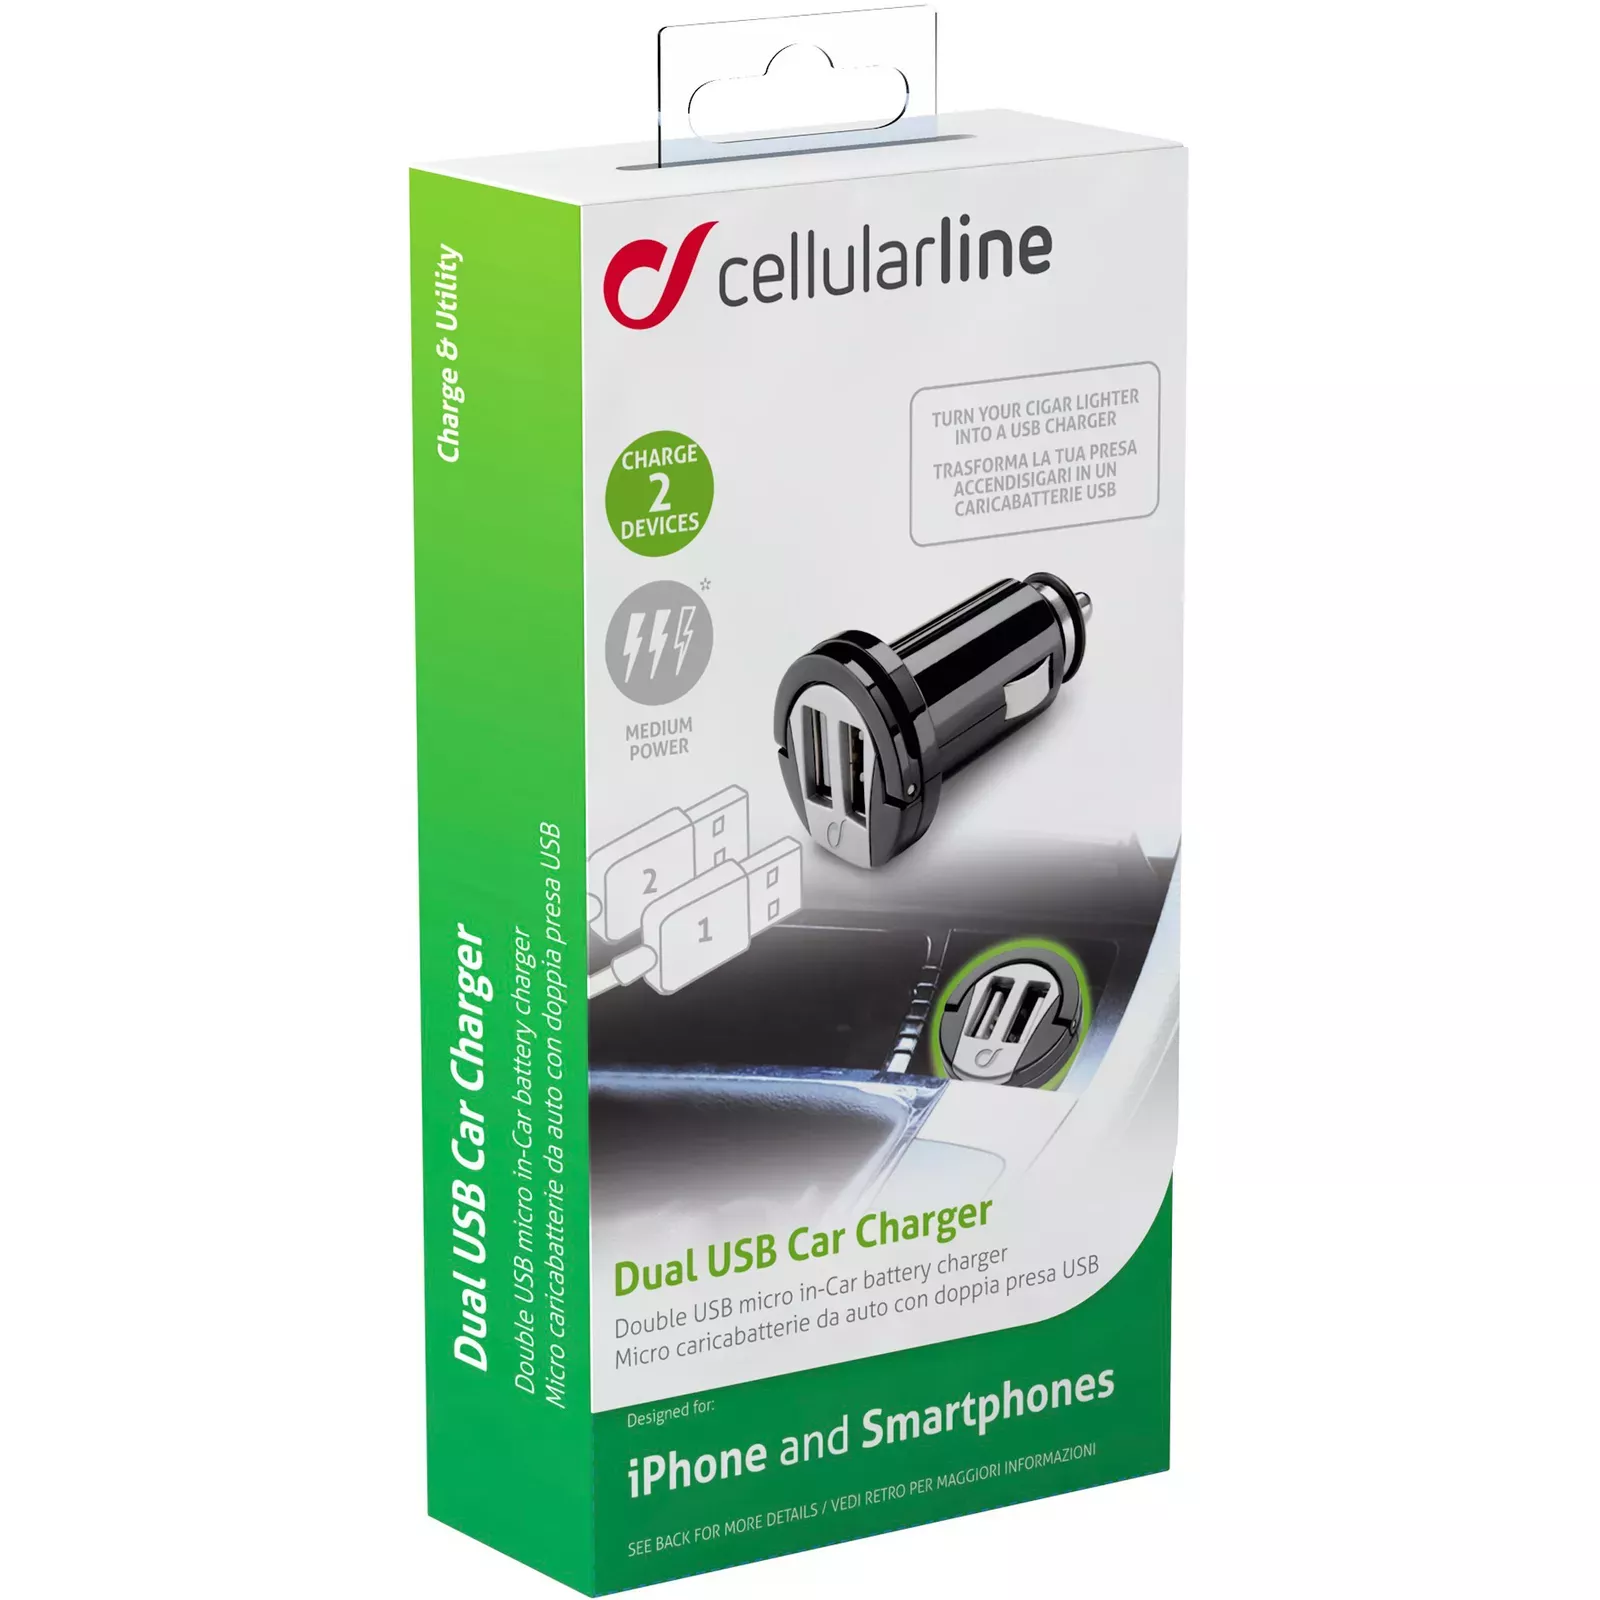 Cellularline MICROCBRUSBDUAL2A mobile device charger MICROCBRUSBDUAL2A